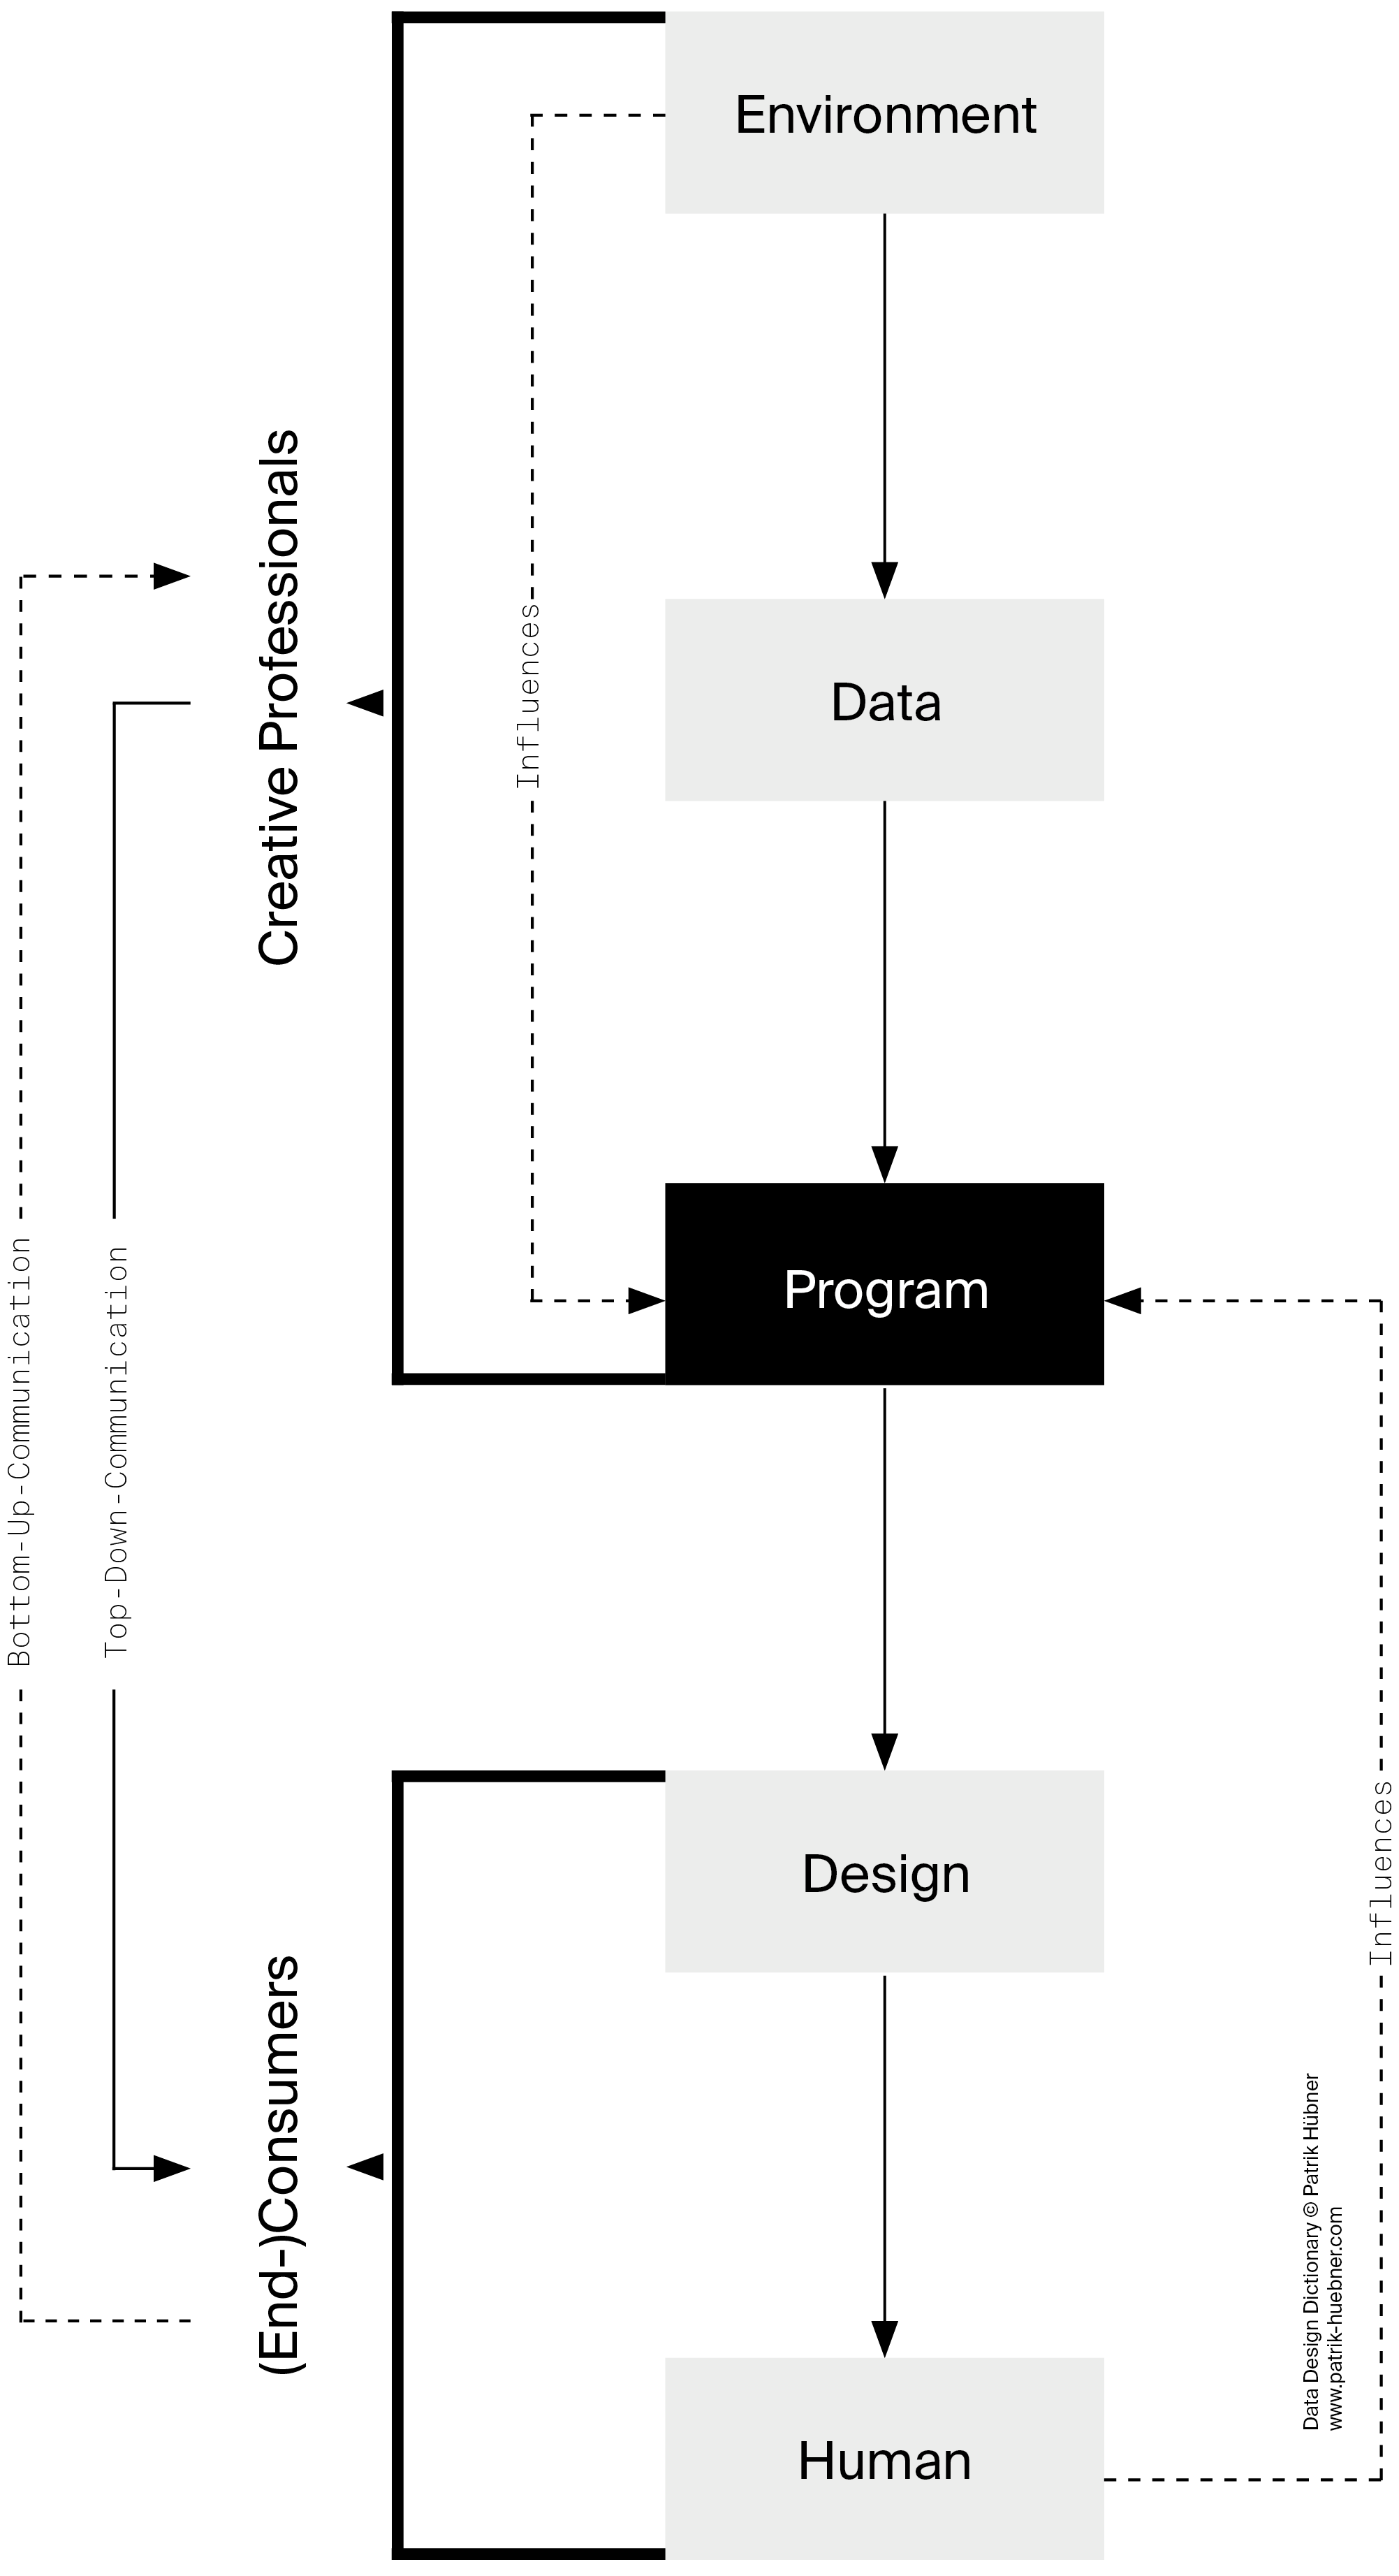 This process graphic shows the flow of information: The environment provides data, which is passed from the machine to the human via design. Both the environment and the human can influence the machine in a cyclical process.